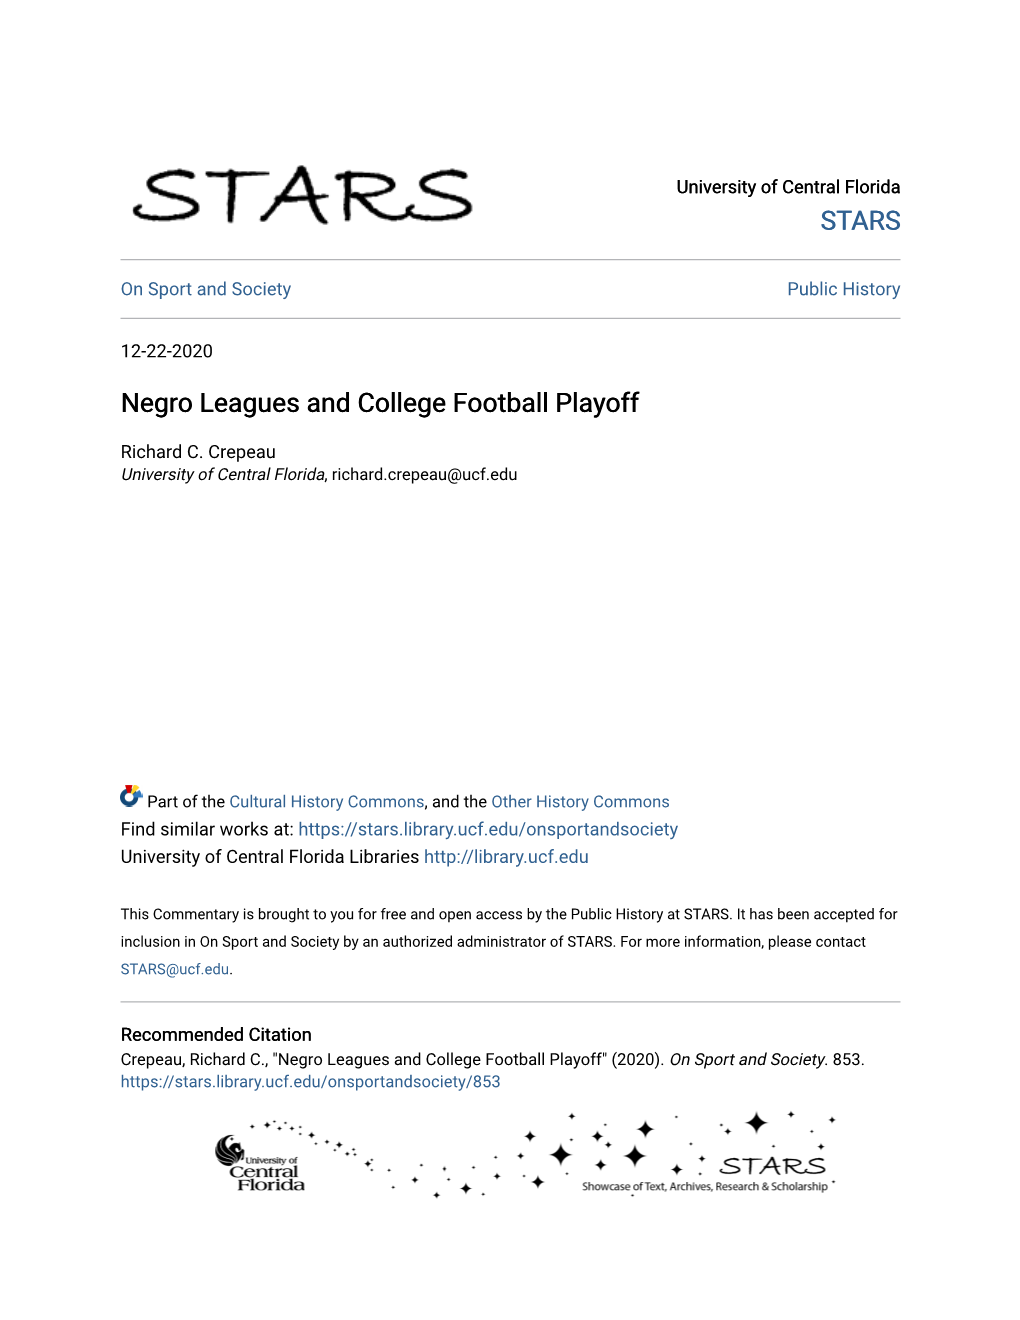 Negro Leagues and College Football Playoff